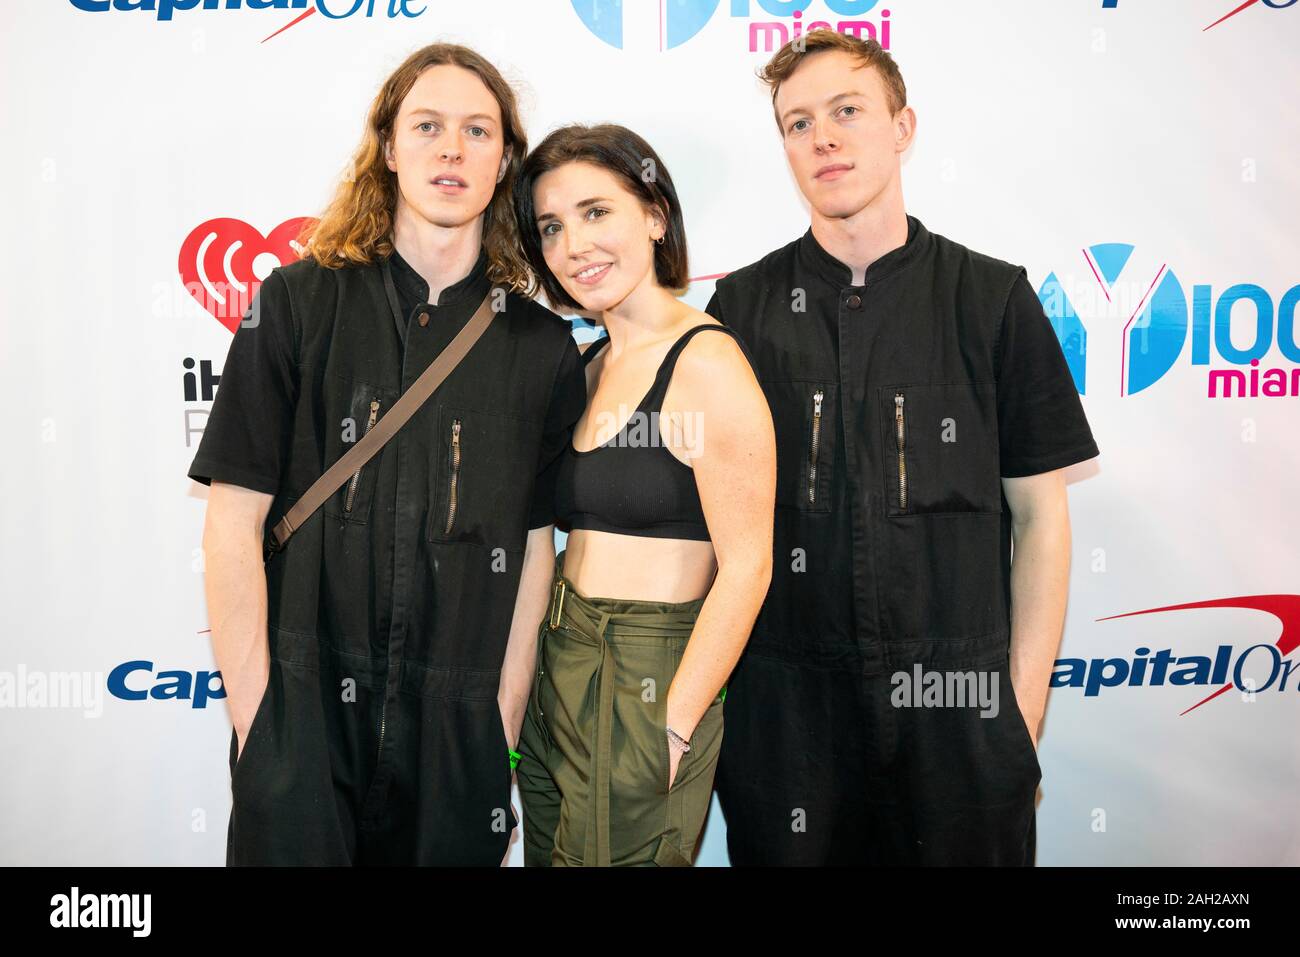 Sunrise, United States. 22nd Dec, 2019. Spencer Ernst, Chelsea Lee and Max Ernst of SHAED pose backstage during the Y100 Jingle Ball at the BB&T Center on December 22, 2019 in Sunrise, Florida. Credit: The Photo Access/Alamy Live News Stock Photo